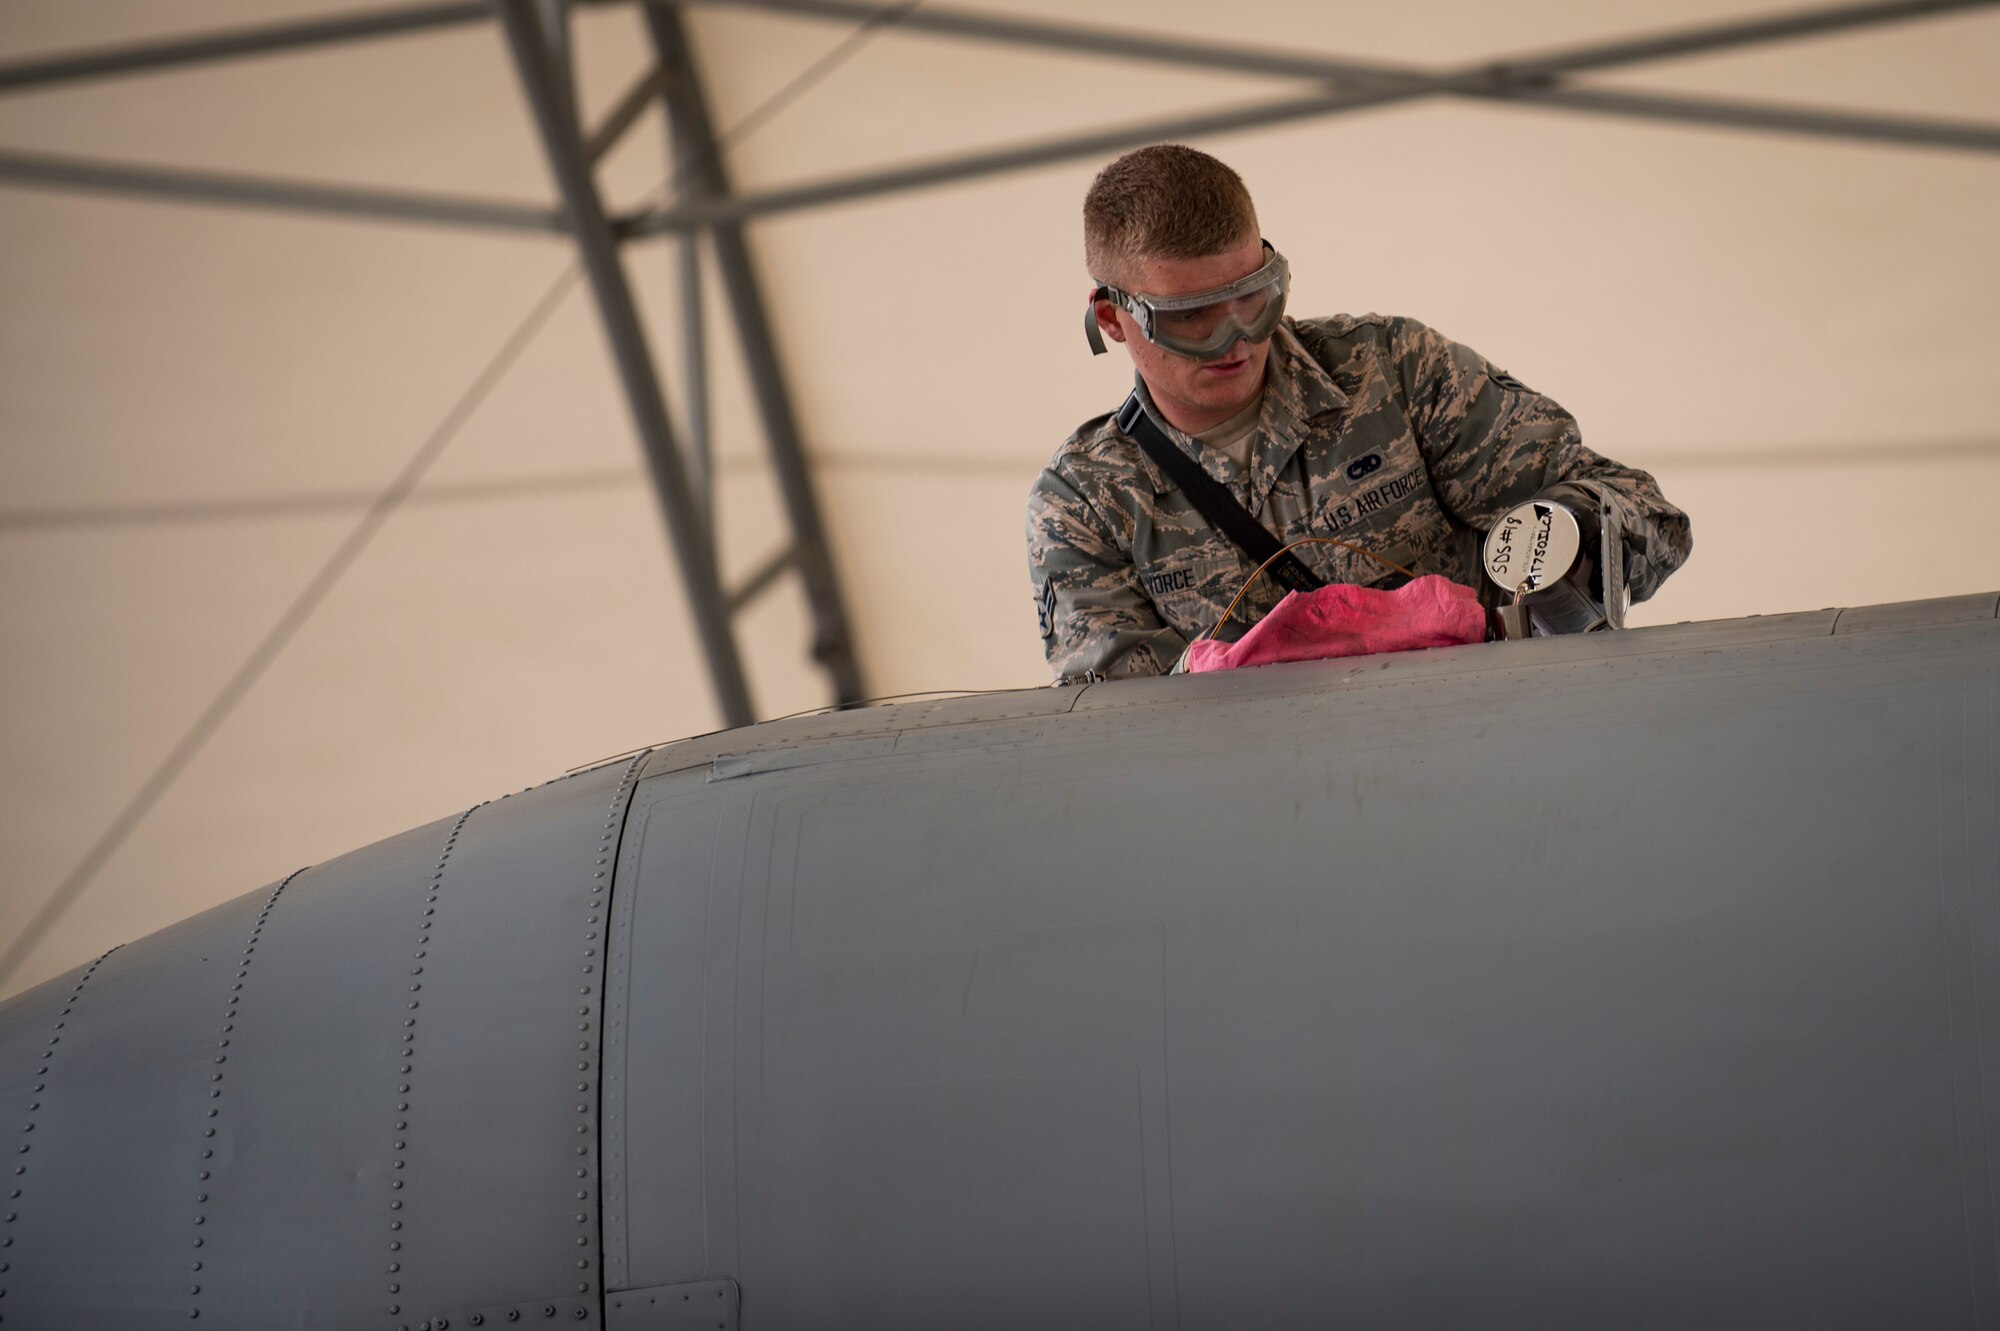 Airman 1st Class Gabriel Vorce, 23d Aircraft Maintenance Squadron crew chief, refills the oil on an A-10C Thunderbolt II during a thru flight inspection, Dec. 7, 2017, at Moody Air Force Base, Ga. Moody recently participated in a week-long, Phase 1, Phase 2 exercise designed to demonstrate the 23d Wing’s ability to meet combatant commander objectives. The exercise tested pilots’ and maintainers’ ability to launch around-the-clock sorties at an accelerated rate during surge operations. (U.S. Air Force photo by Andrea Jenkins)